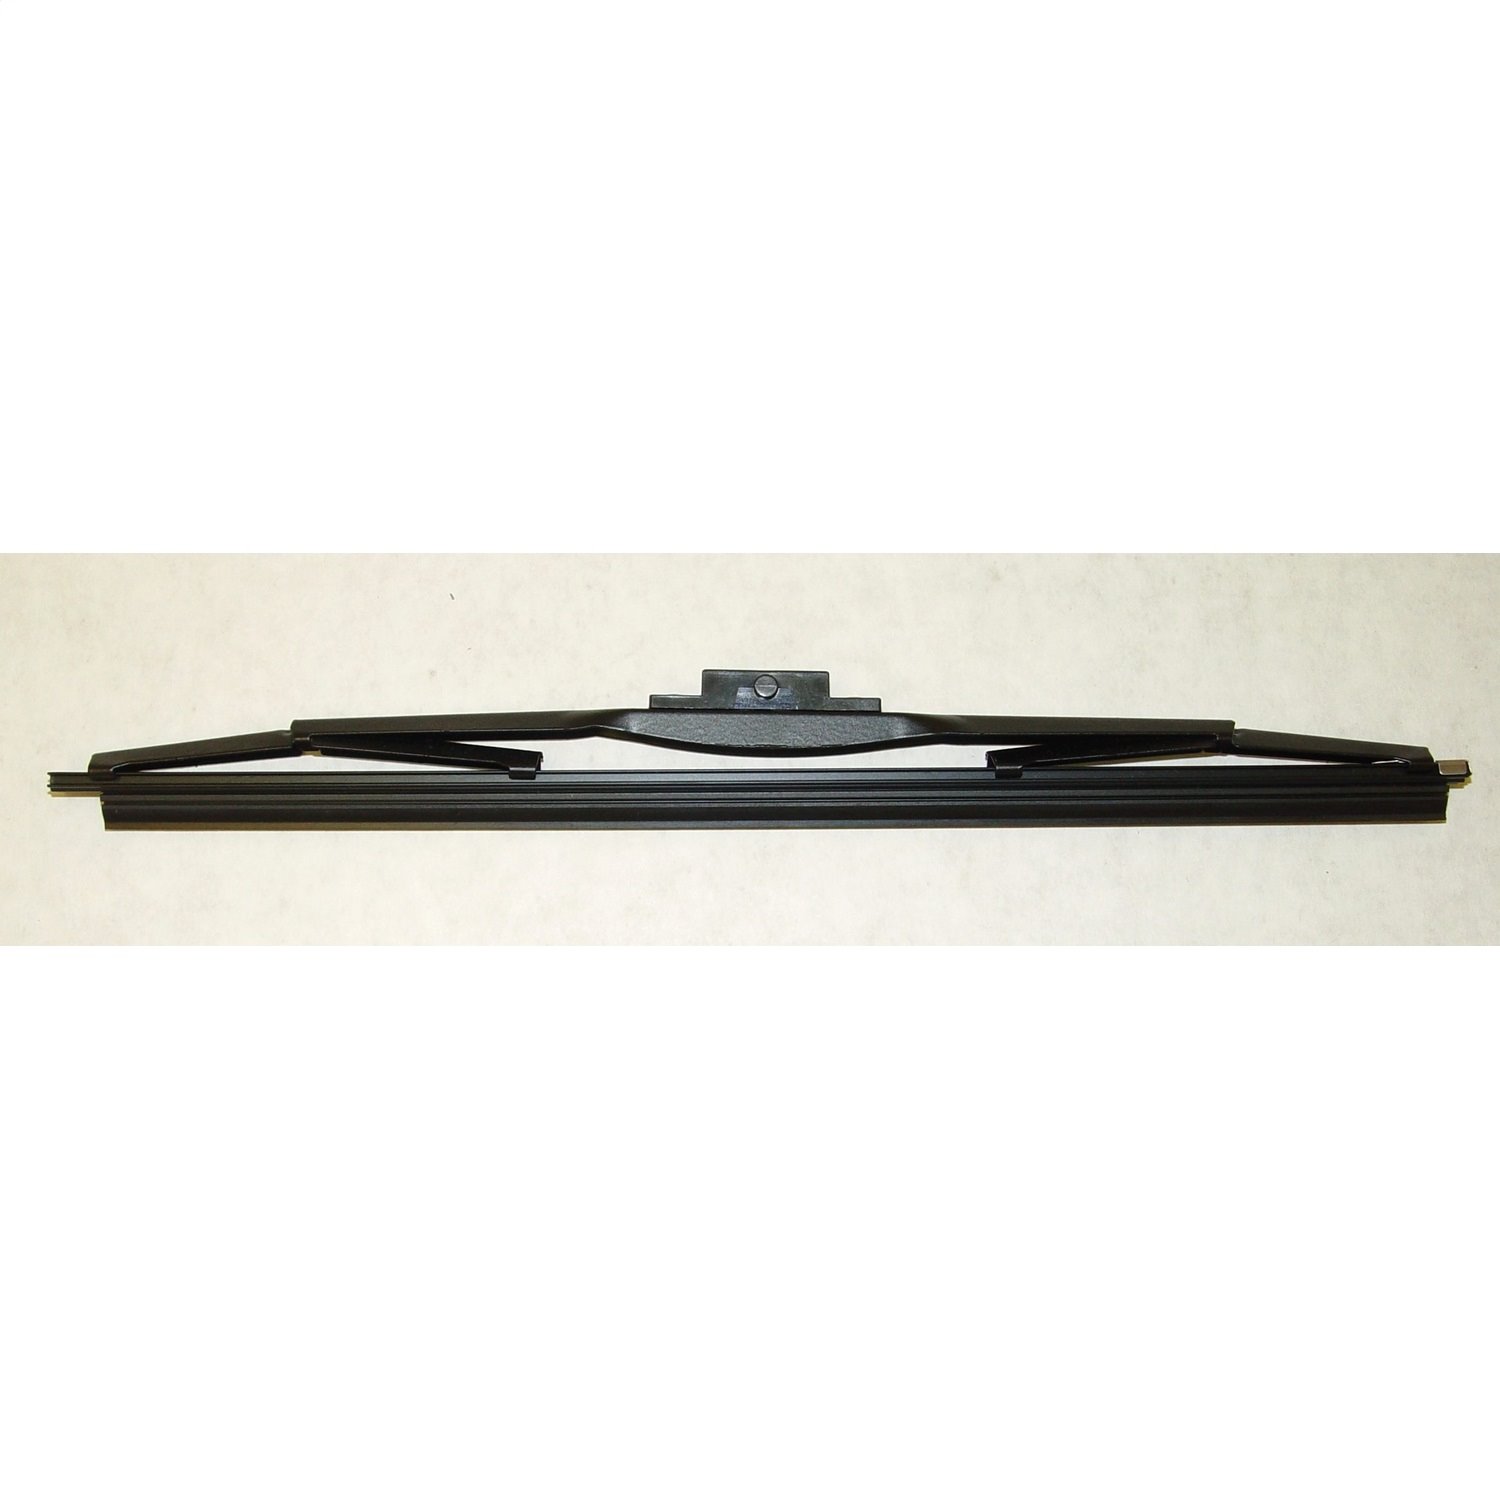 This 11 inch windshield wiper blade from Omix-ADA fits 68-86 Jeep CJ models.